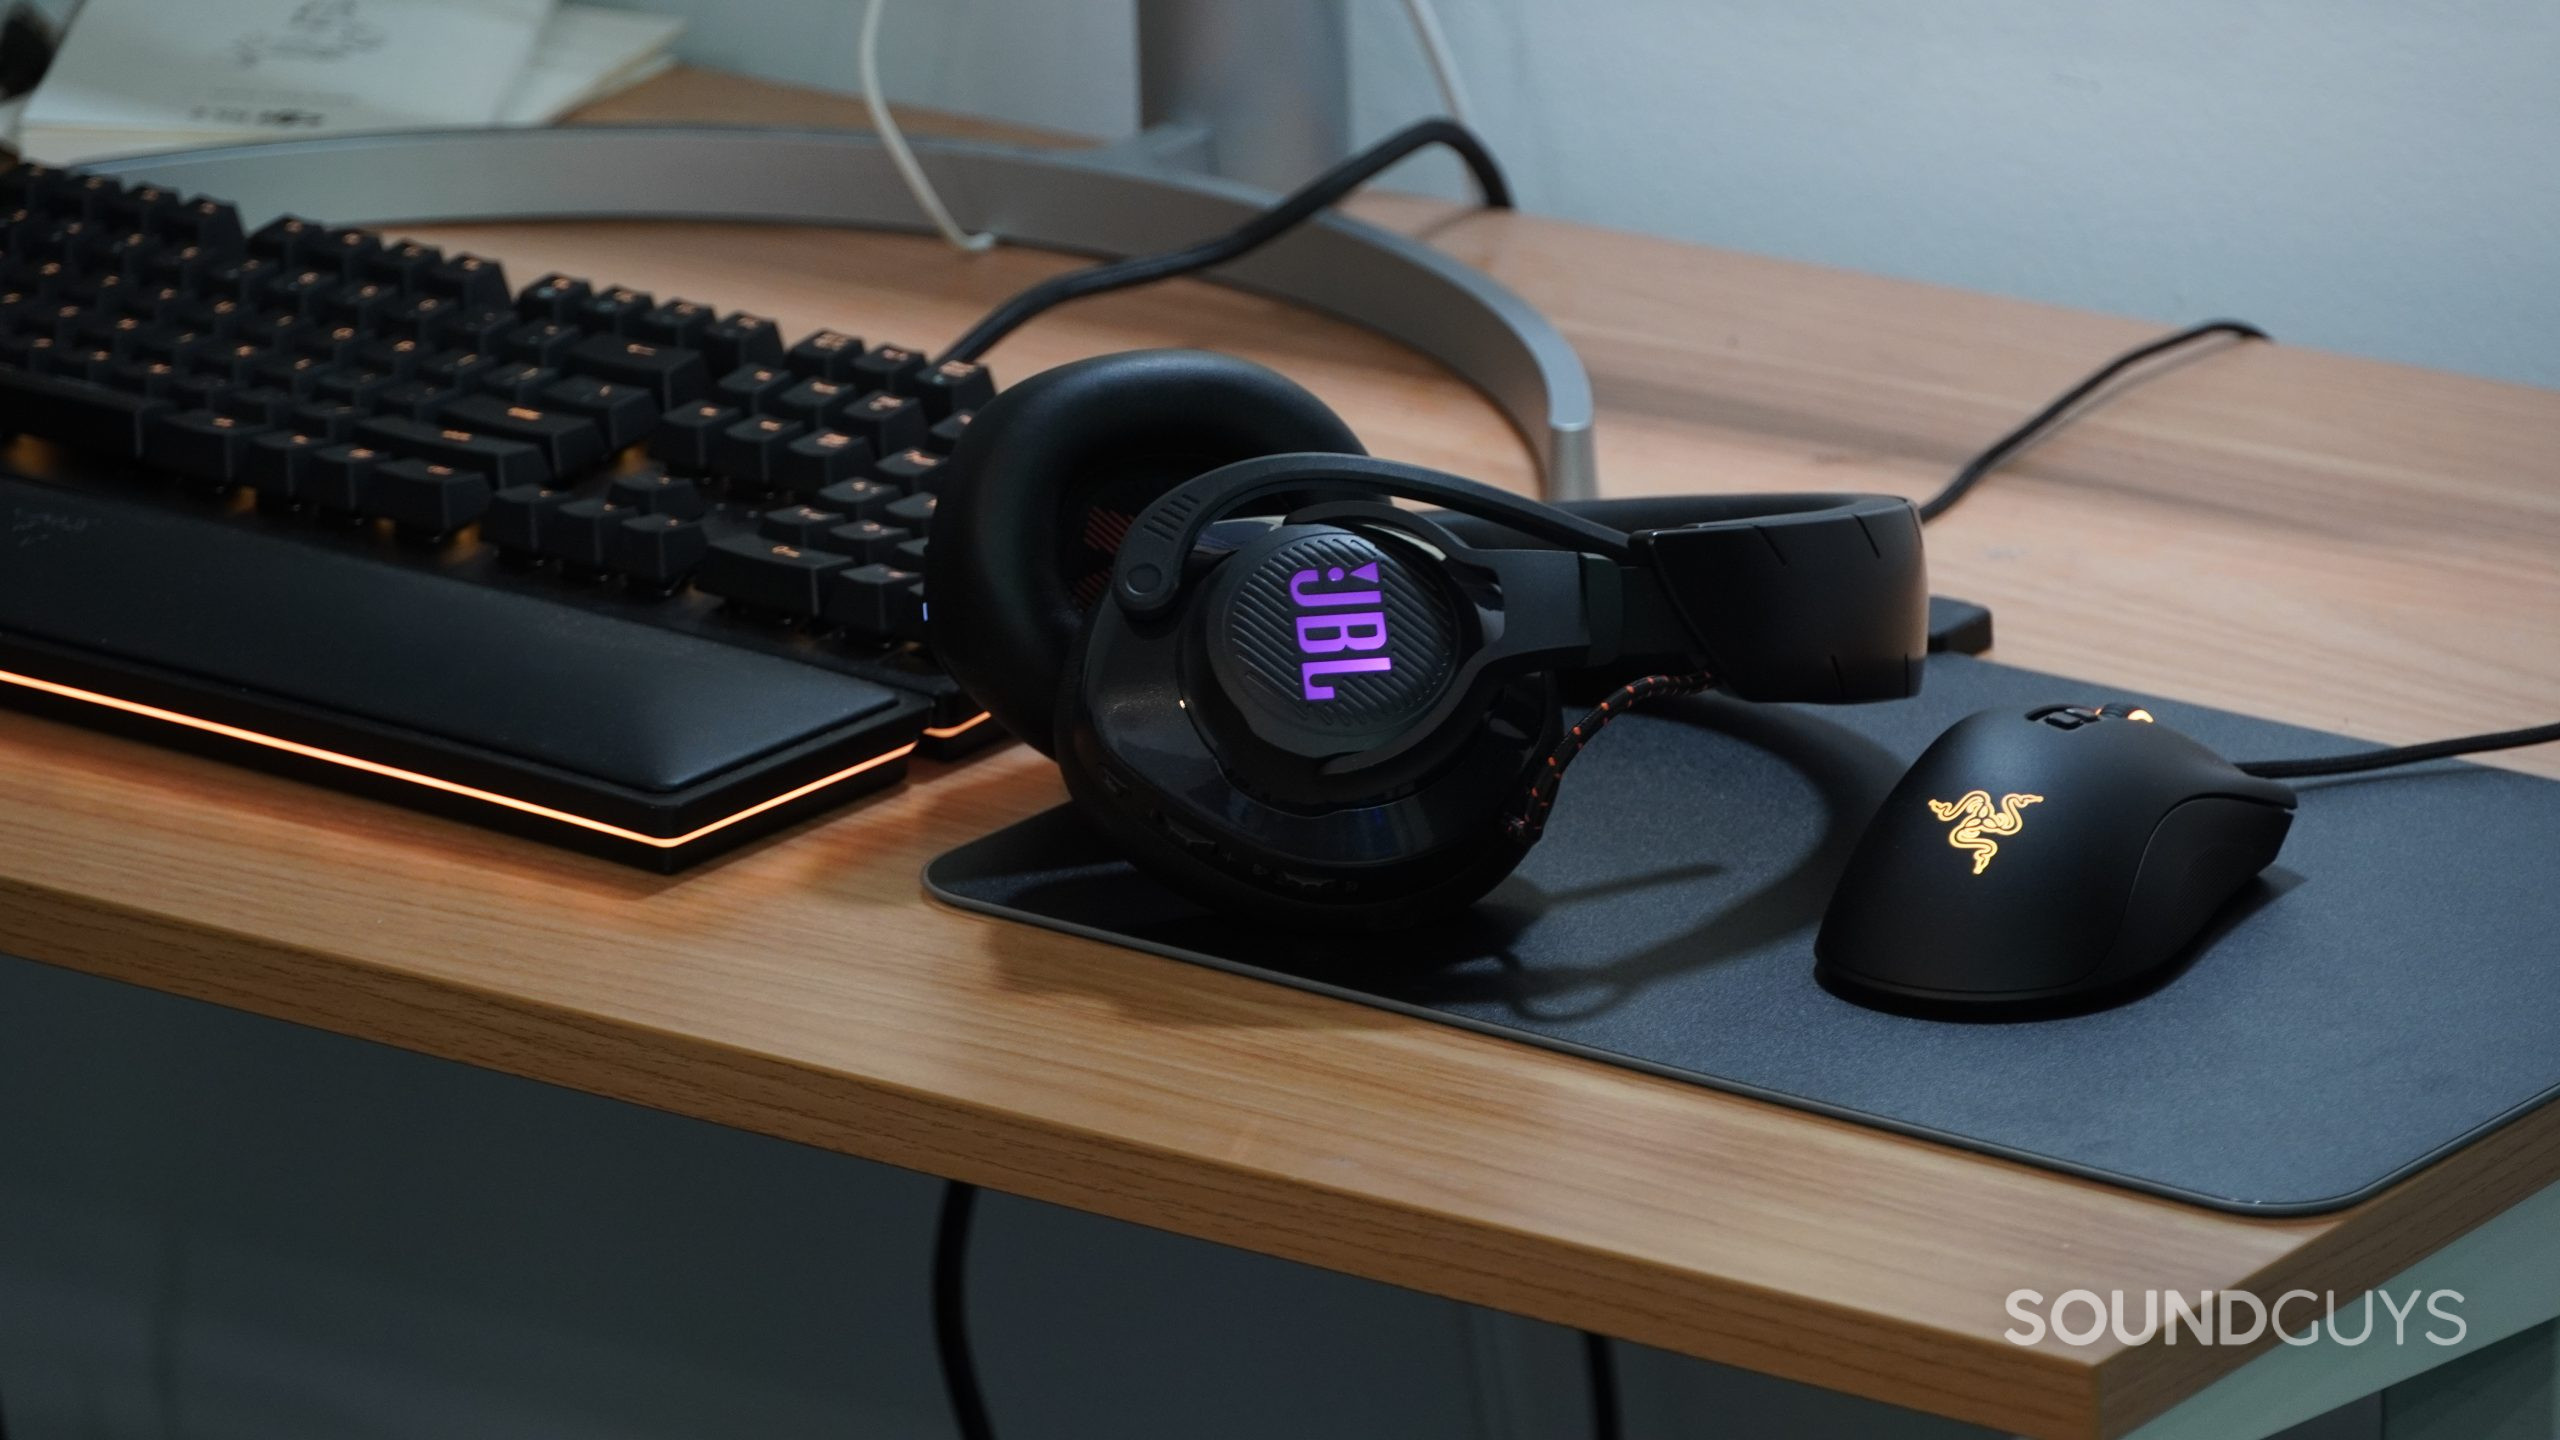 Photo of the JBL Quantum 600 on a desk next to some Razer peripherals